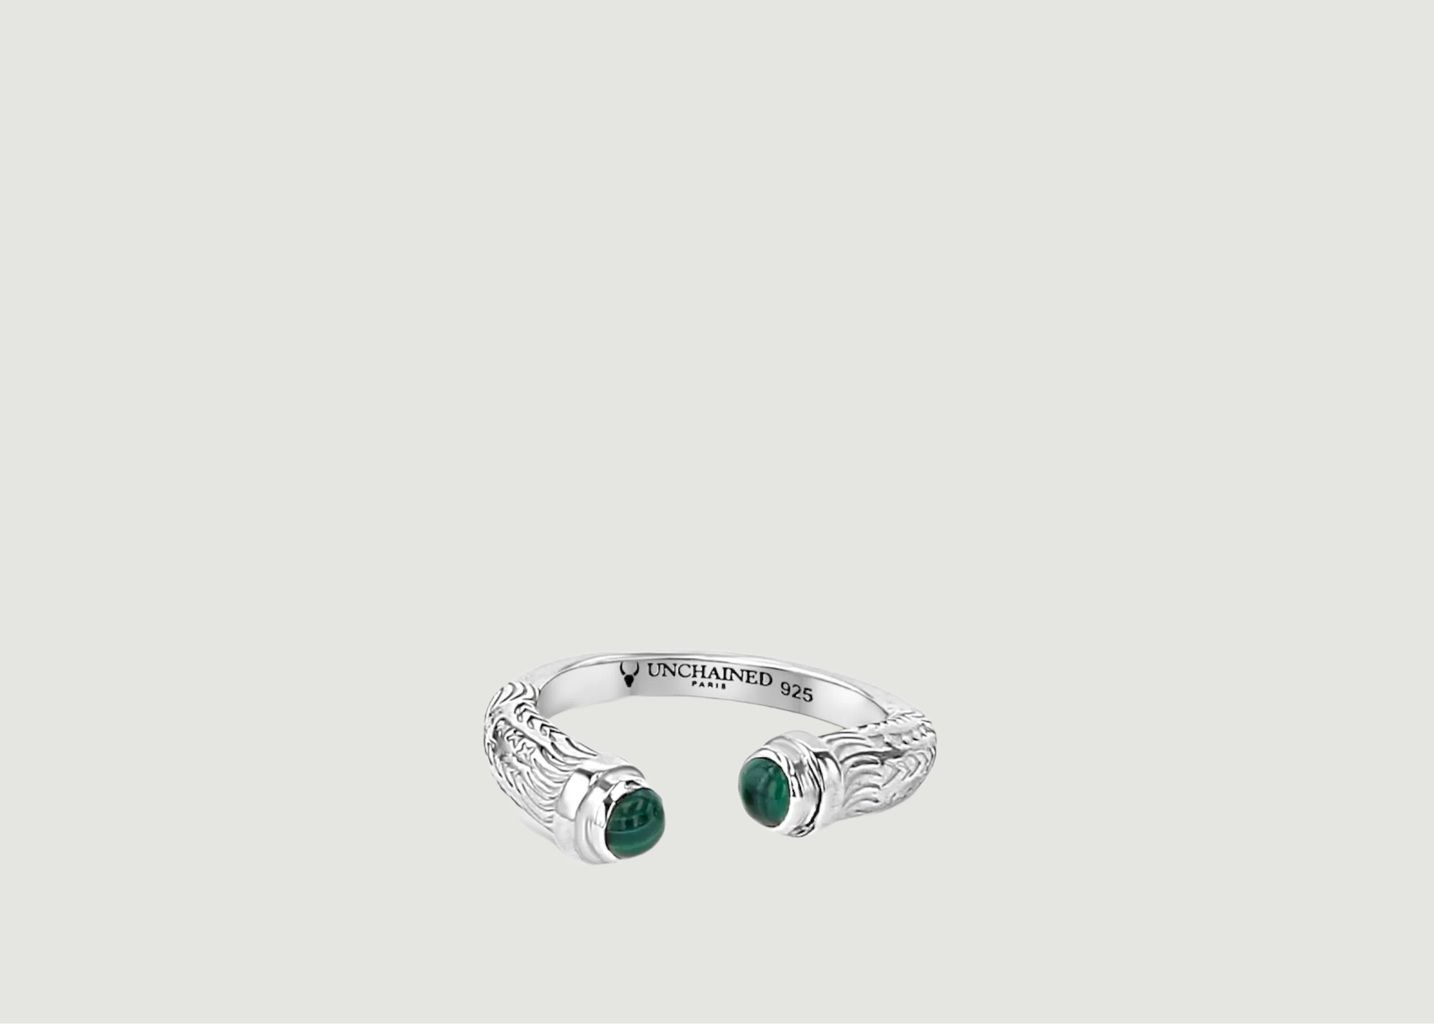 Malala Malachite Ring in Silver 925 - Unchained Paris